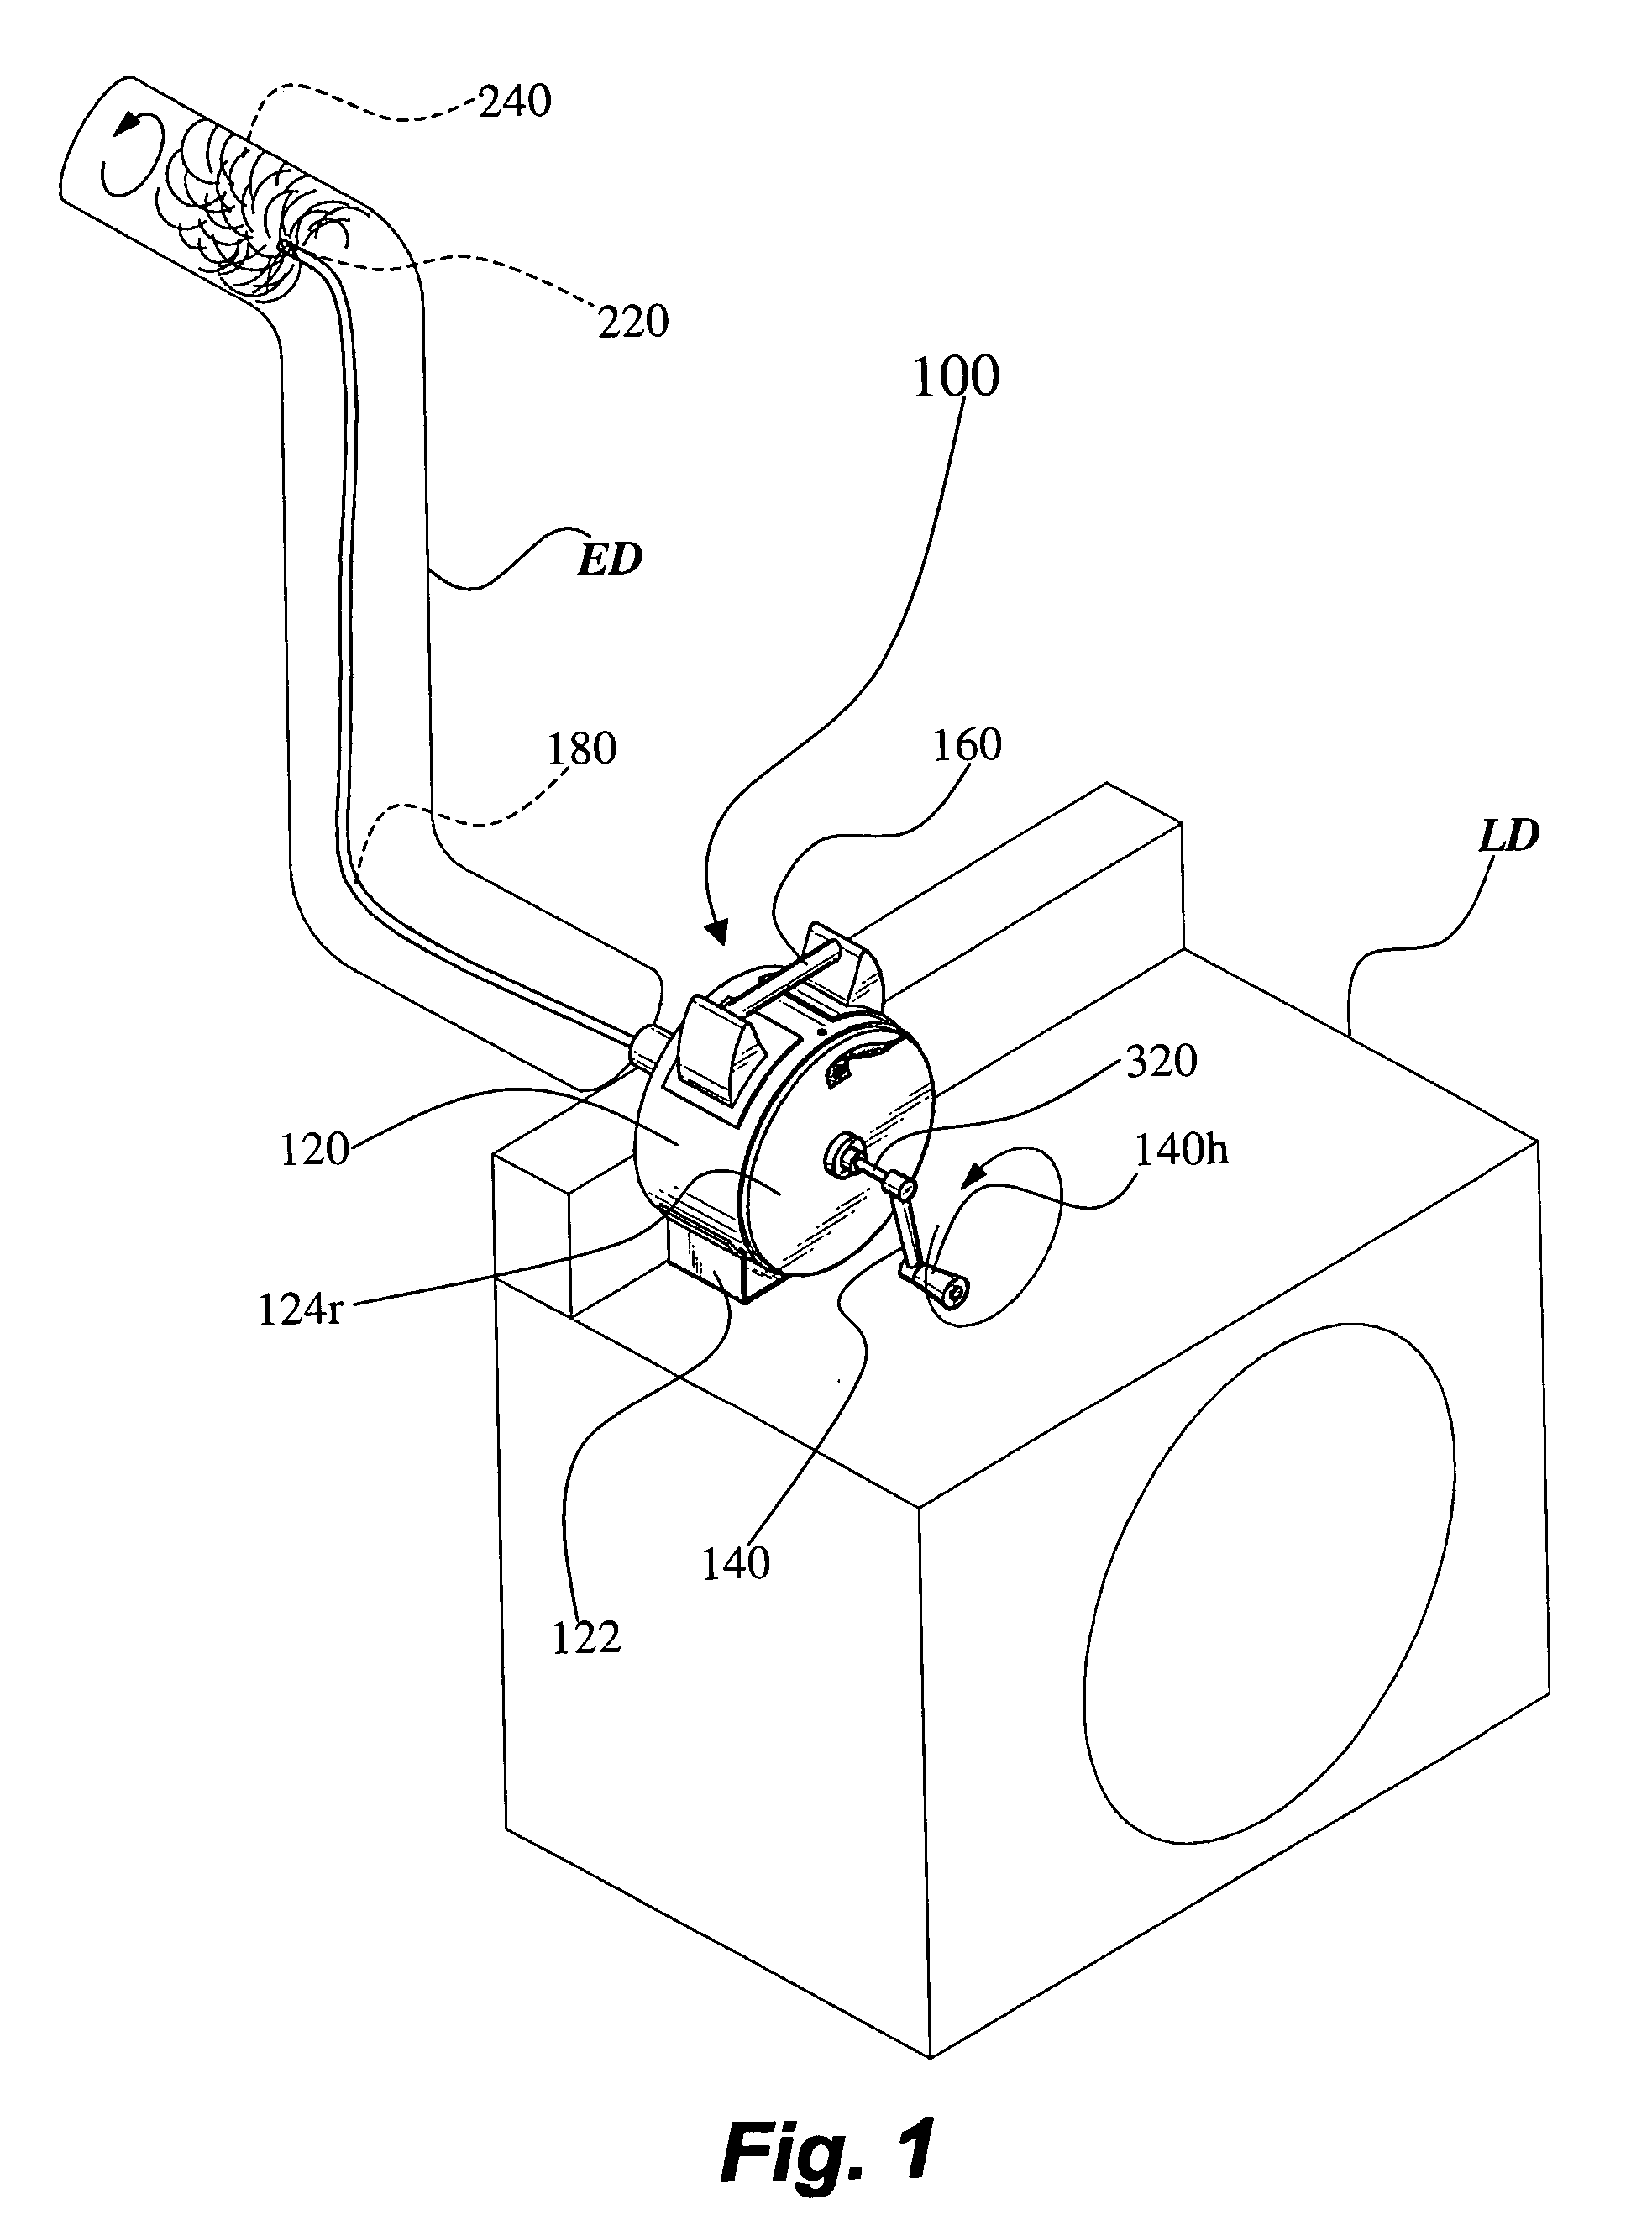 Cleaning device for cleaning ducts and pipes